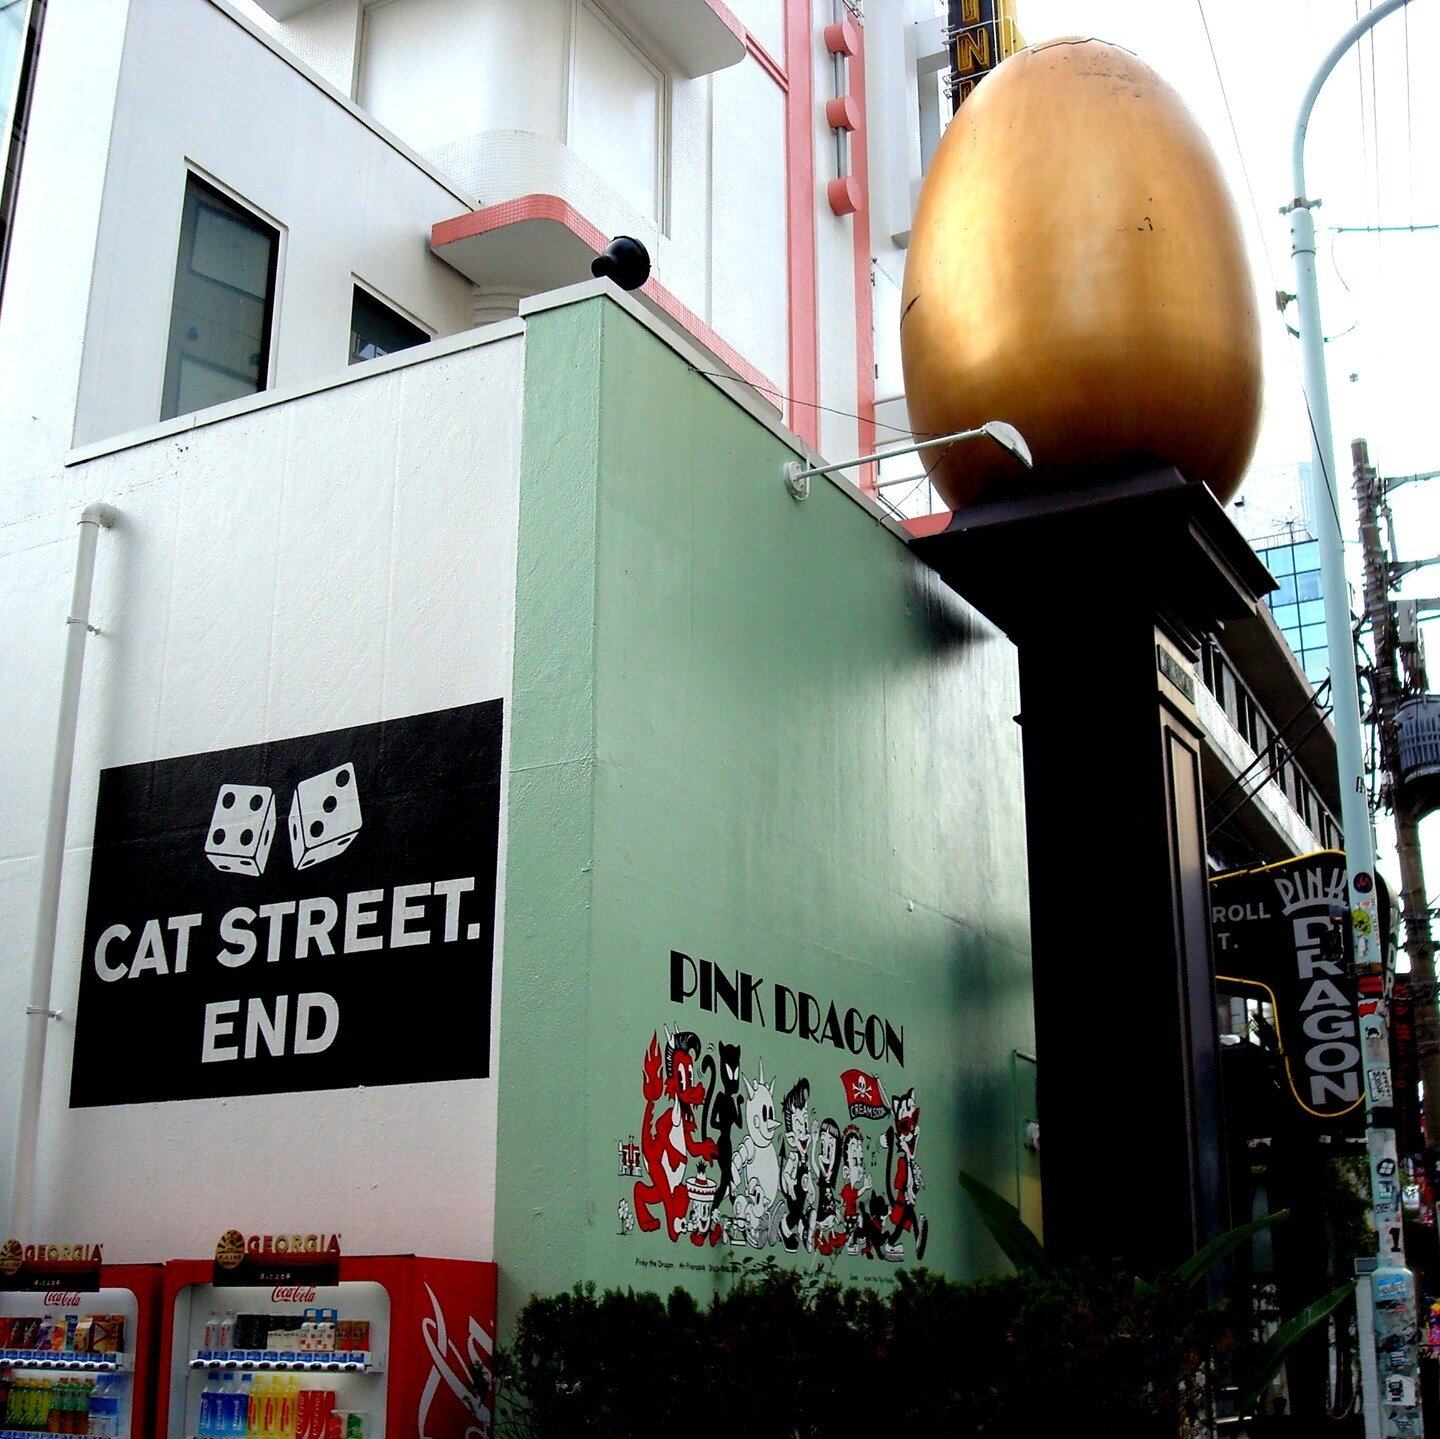 When I was first living in Japan, I didn't yet have Google Maps or a smartphone to rely on. ⁠
⁠
My cousin and I did a location tour of all the locations from Subarashiki Kono Sekai, and one of them was Cat Street, but after wandering around for hours